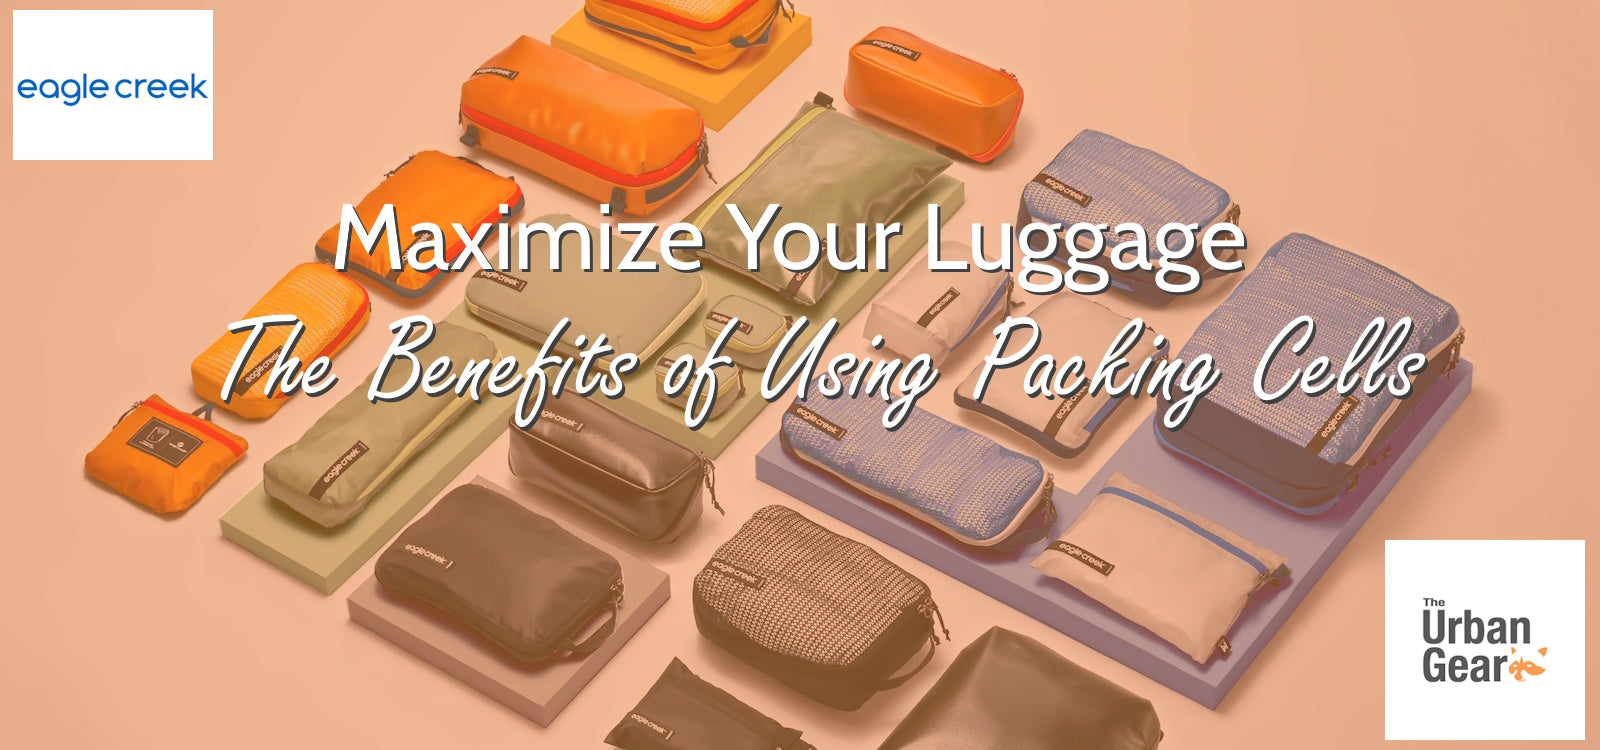 Maximize Your Luggage: The Benefits of Using Packing Cells